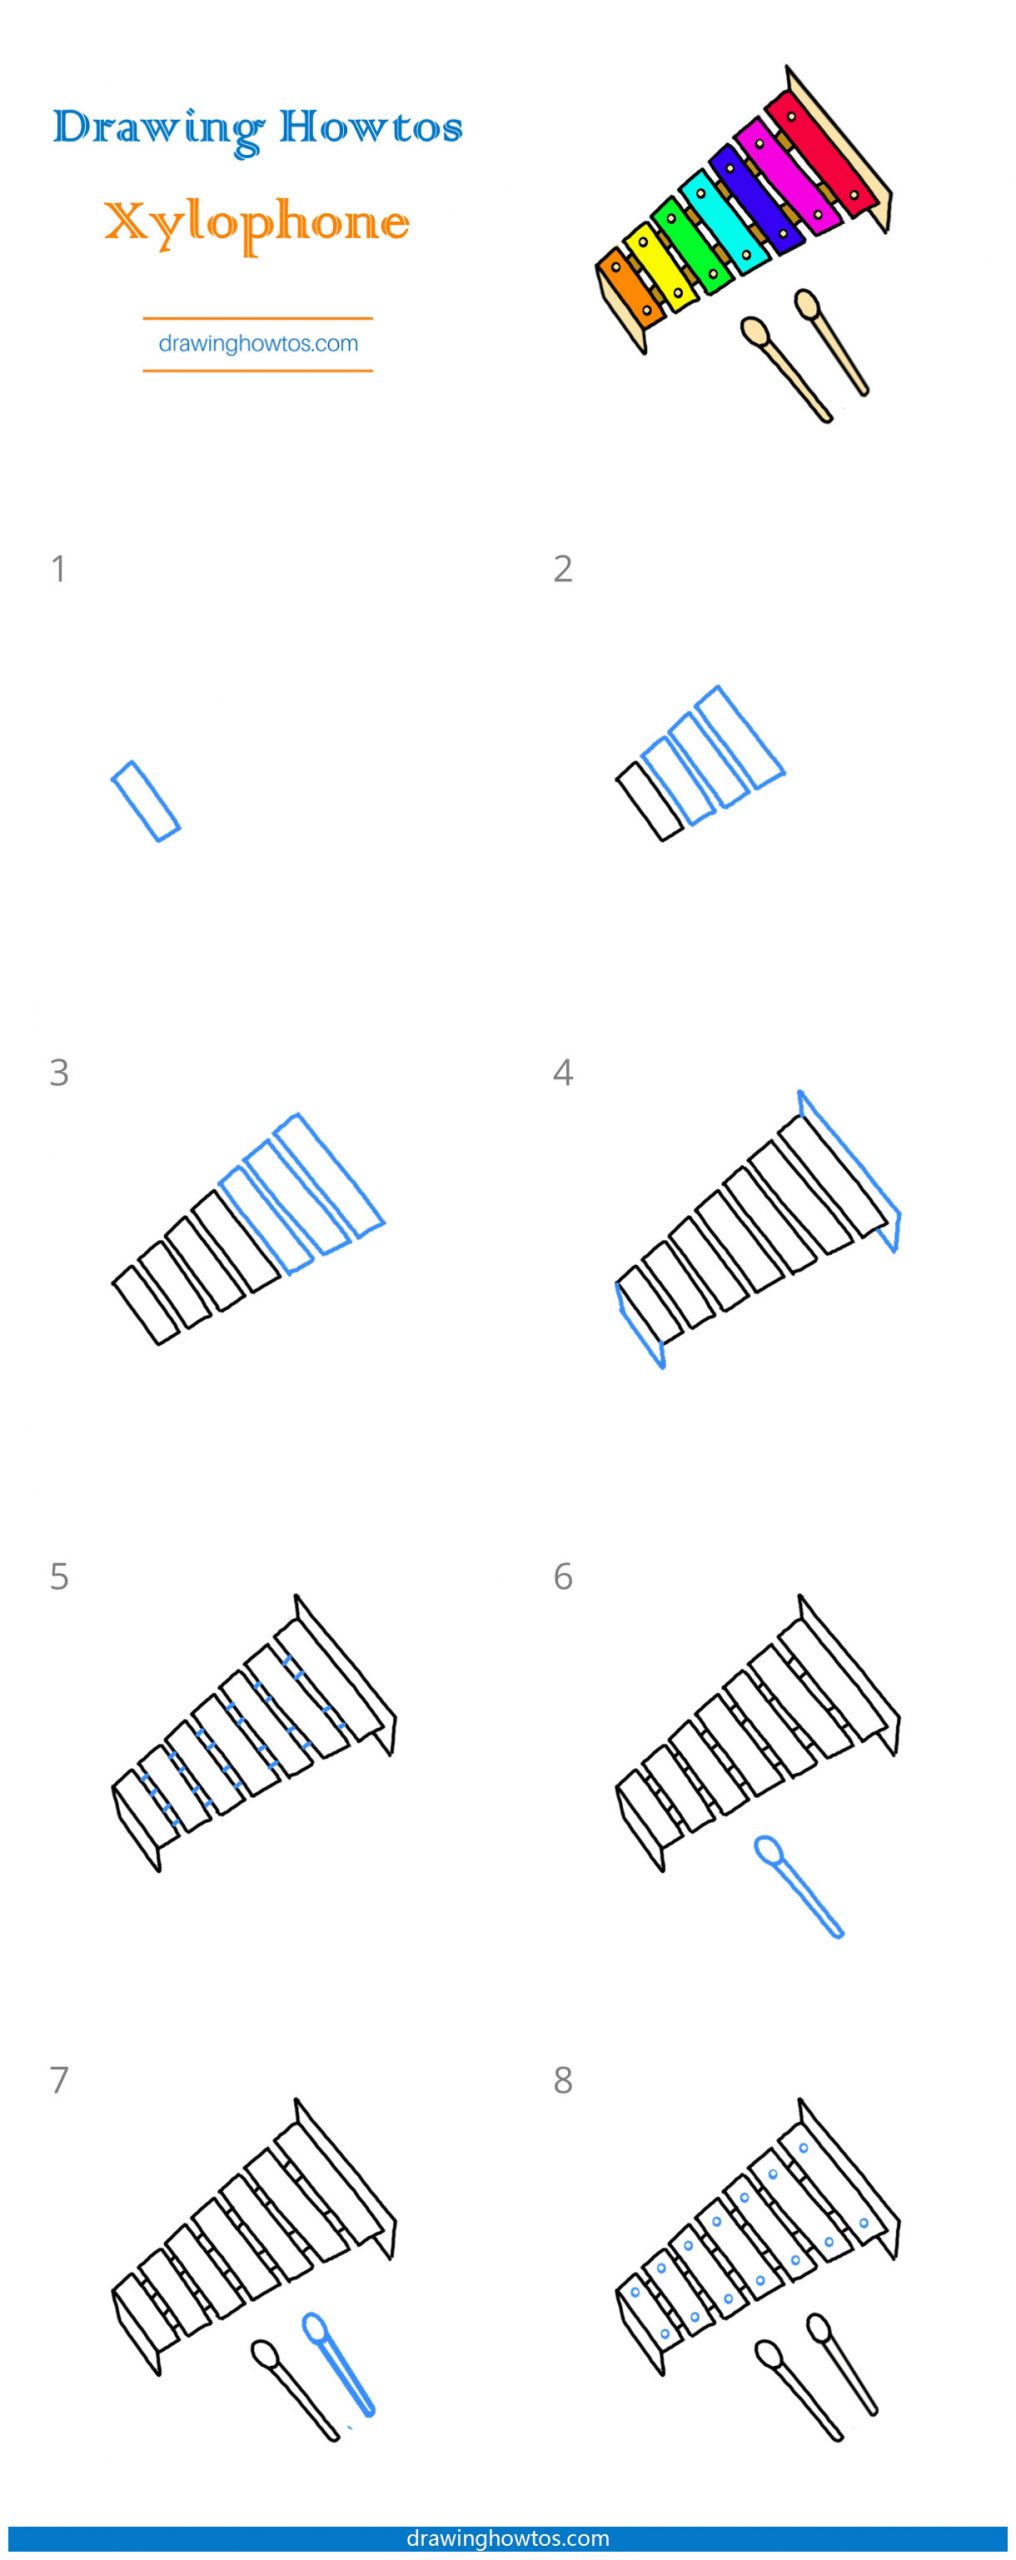 How to Draw a Xylophone Step by Step